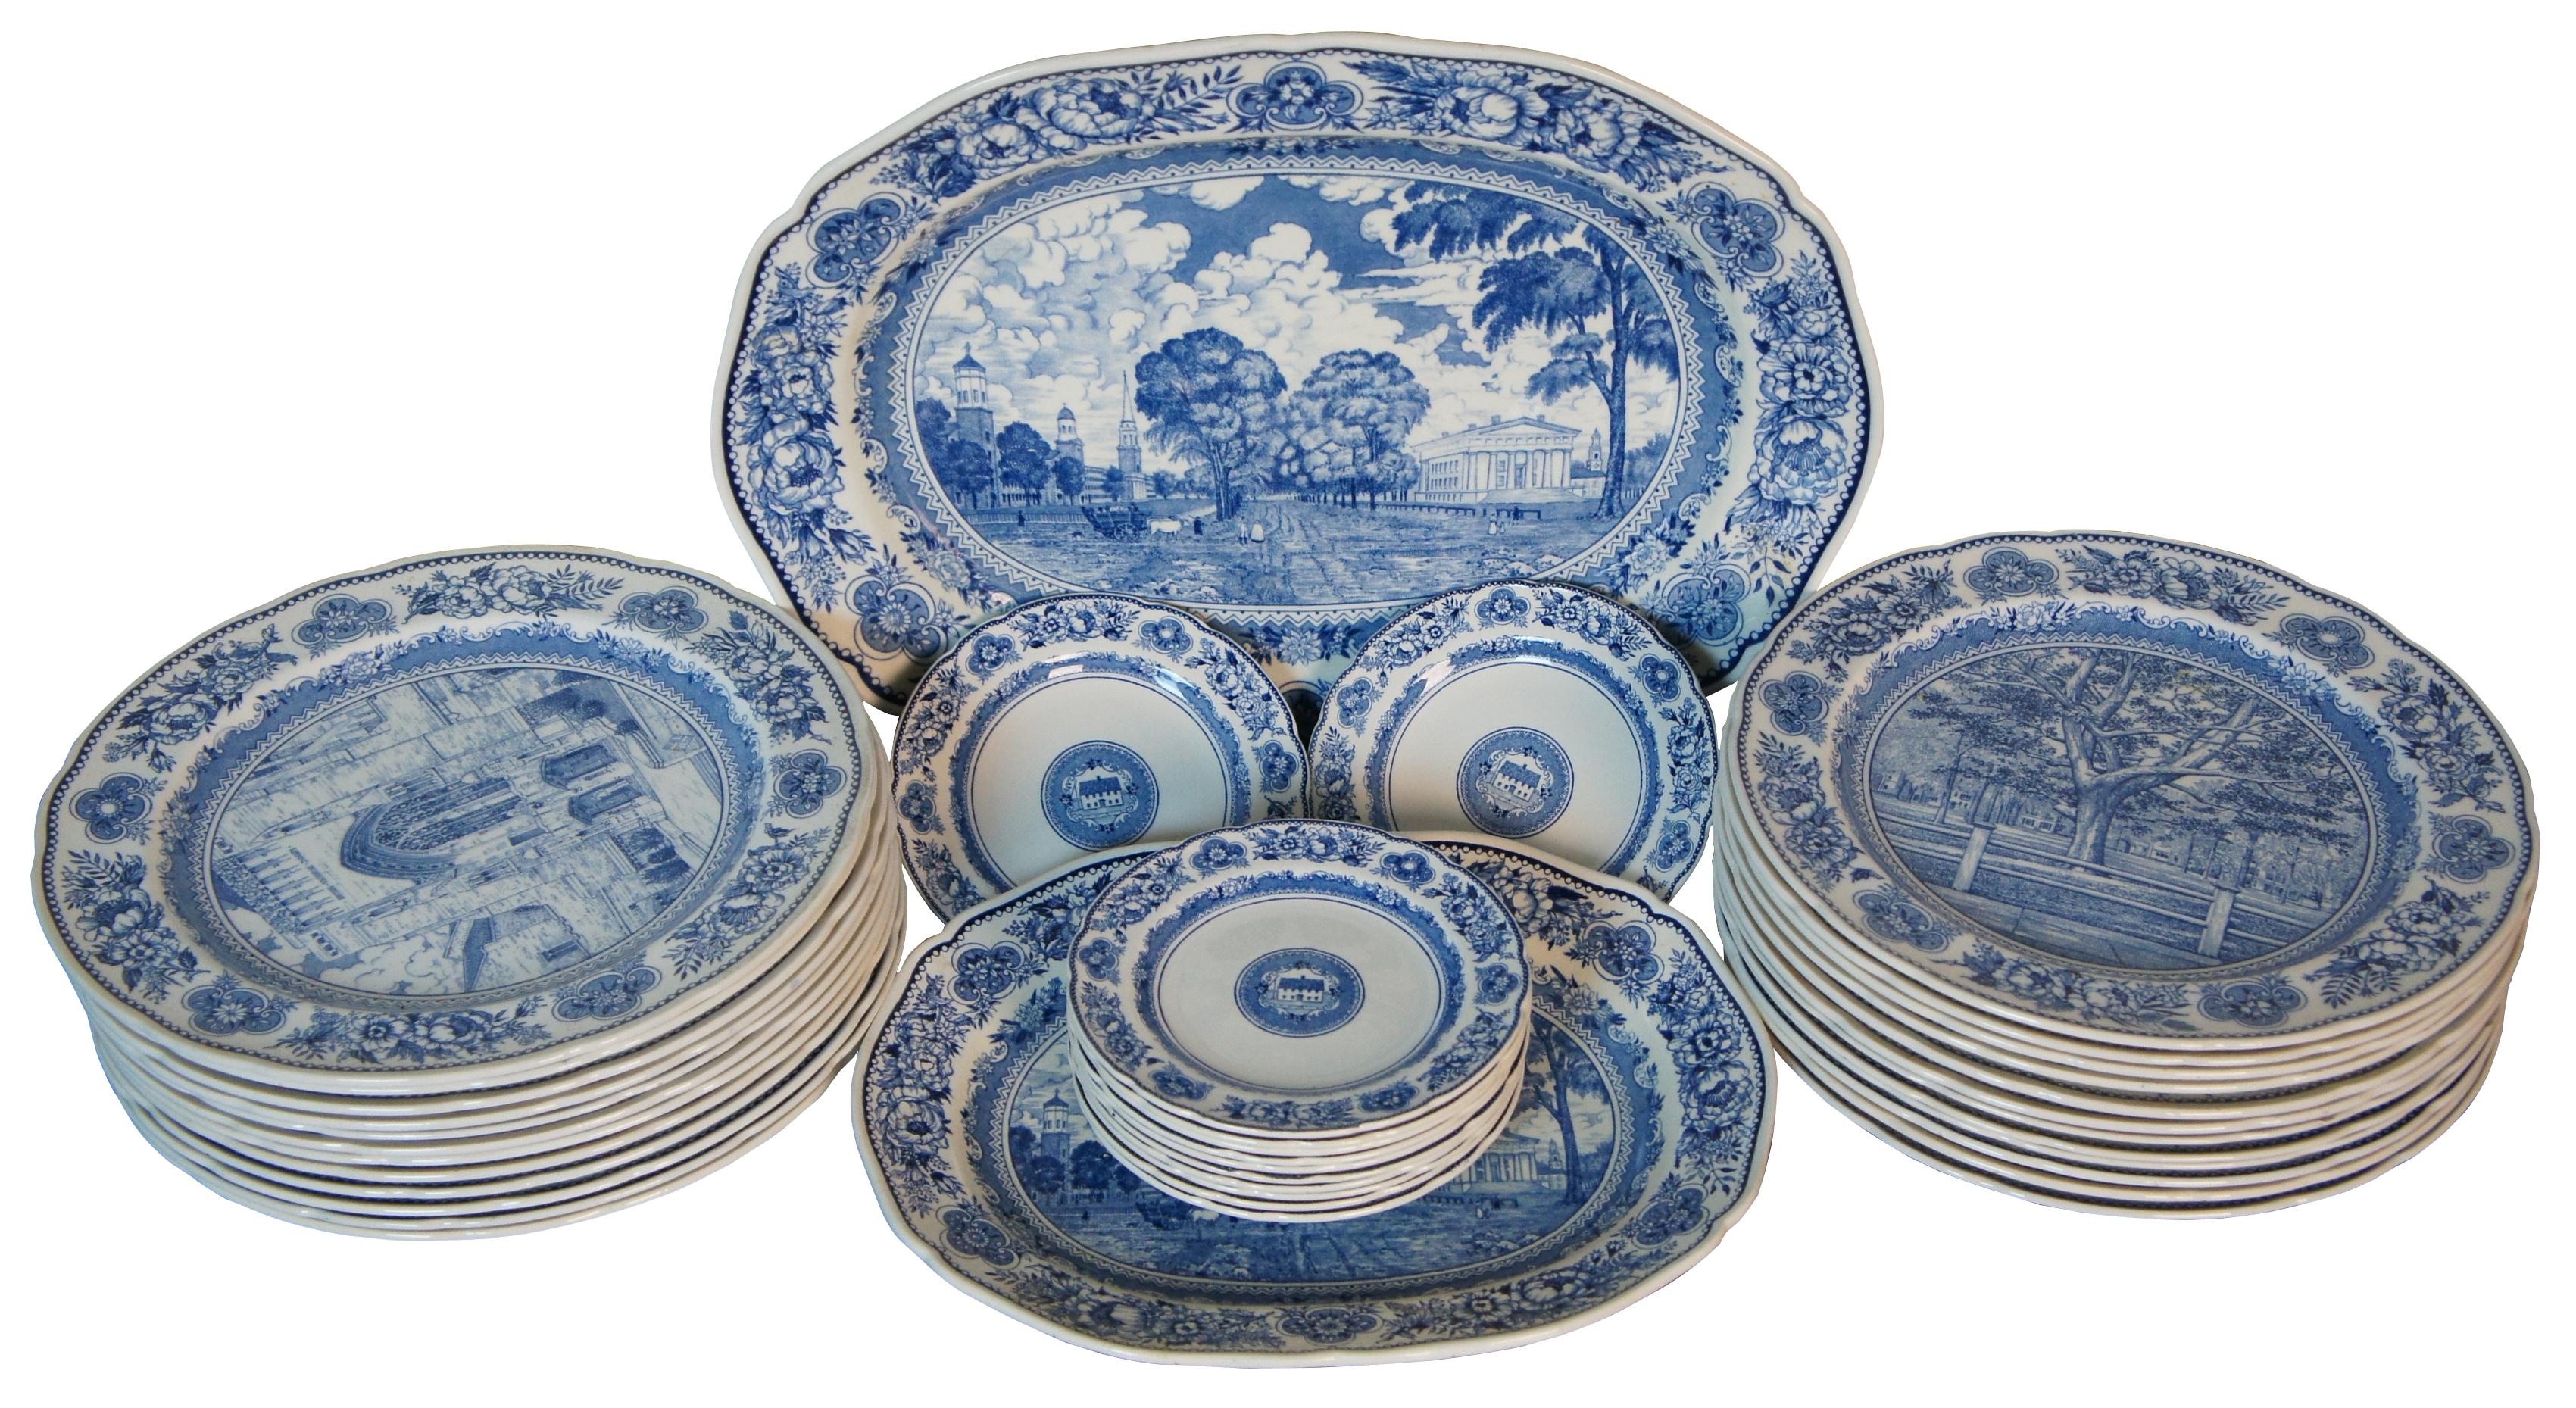 Antique 38 piece set of Wedgwood collegiate china showing the buildings of Yale University. Set matching platters in two sizes, a set of 12 matching bread plates, and 24 dinner plates comprising two each of twelve different patterns.

Large